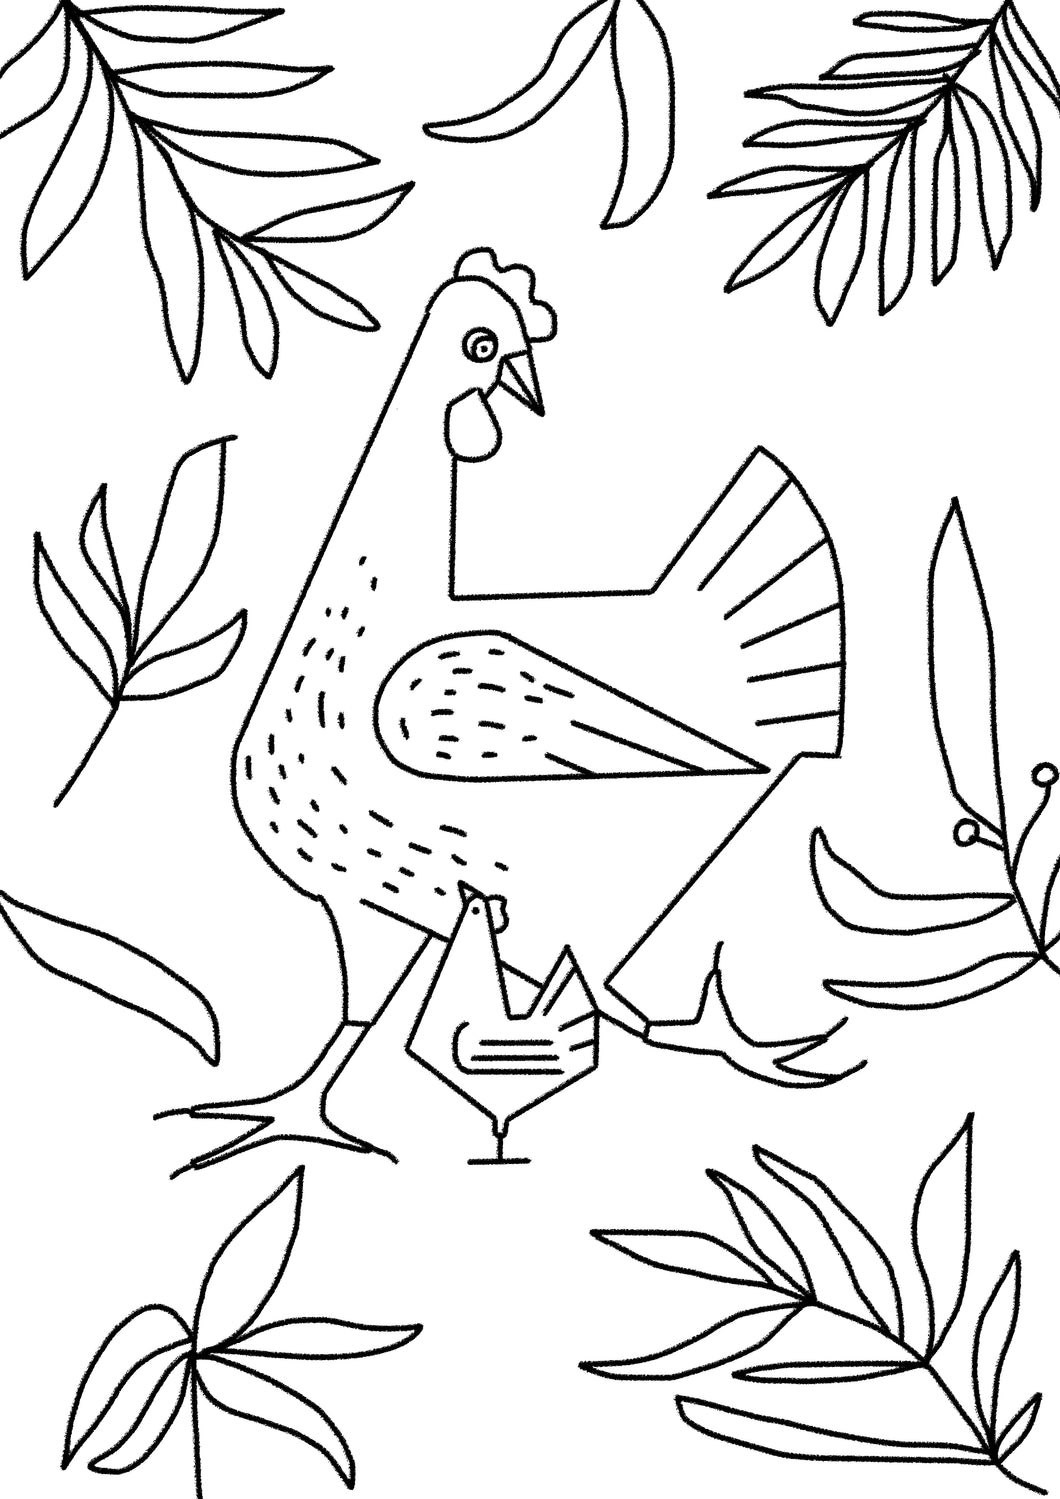 Chickens Coloring Page